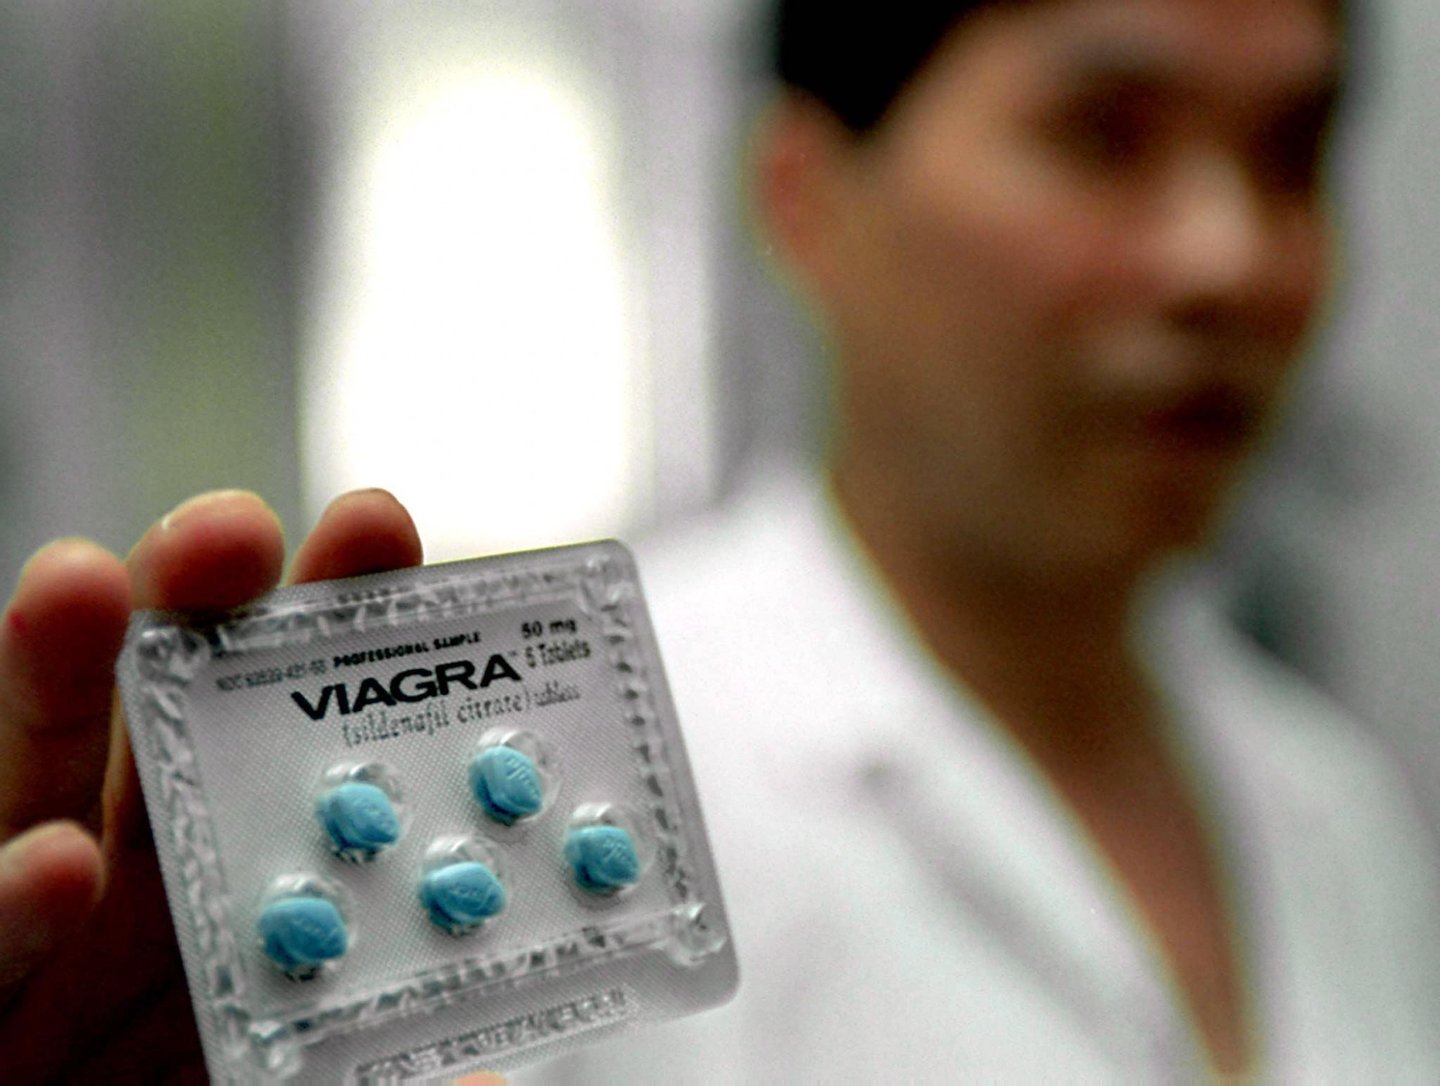 SHANGHAI, CHINA - JULY 5: A Chinese doctor shows the anti-impotence drug Viagra at a hospital in Shanghai 05 July 2000. Viagra officially made its debut in mainland China 03 July and is now available by prescription in full-service Chinese hospitals for the retail price of 71 yuan (8.60 USD) for a 25mg-dose and 99 yuan (11.90 USD) for a 50mg-dose per tablet. In the Chinese market, Viagra, sold under the Chinese name of Wan Ai Ke, is being produced in a joint venture factory between Pfizer pharmaceutical and Dalian pharmaceutical in the northeastern Chinese city of Dalian. AFP PHOTO/LIU Jin (Photo credit should read LIU JIN/AFP/Getty Images)